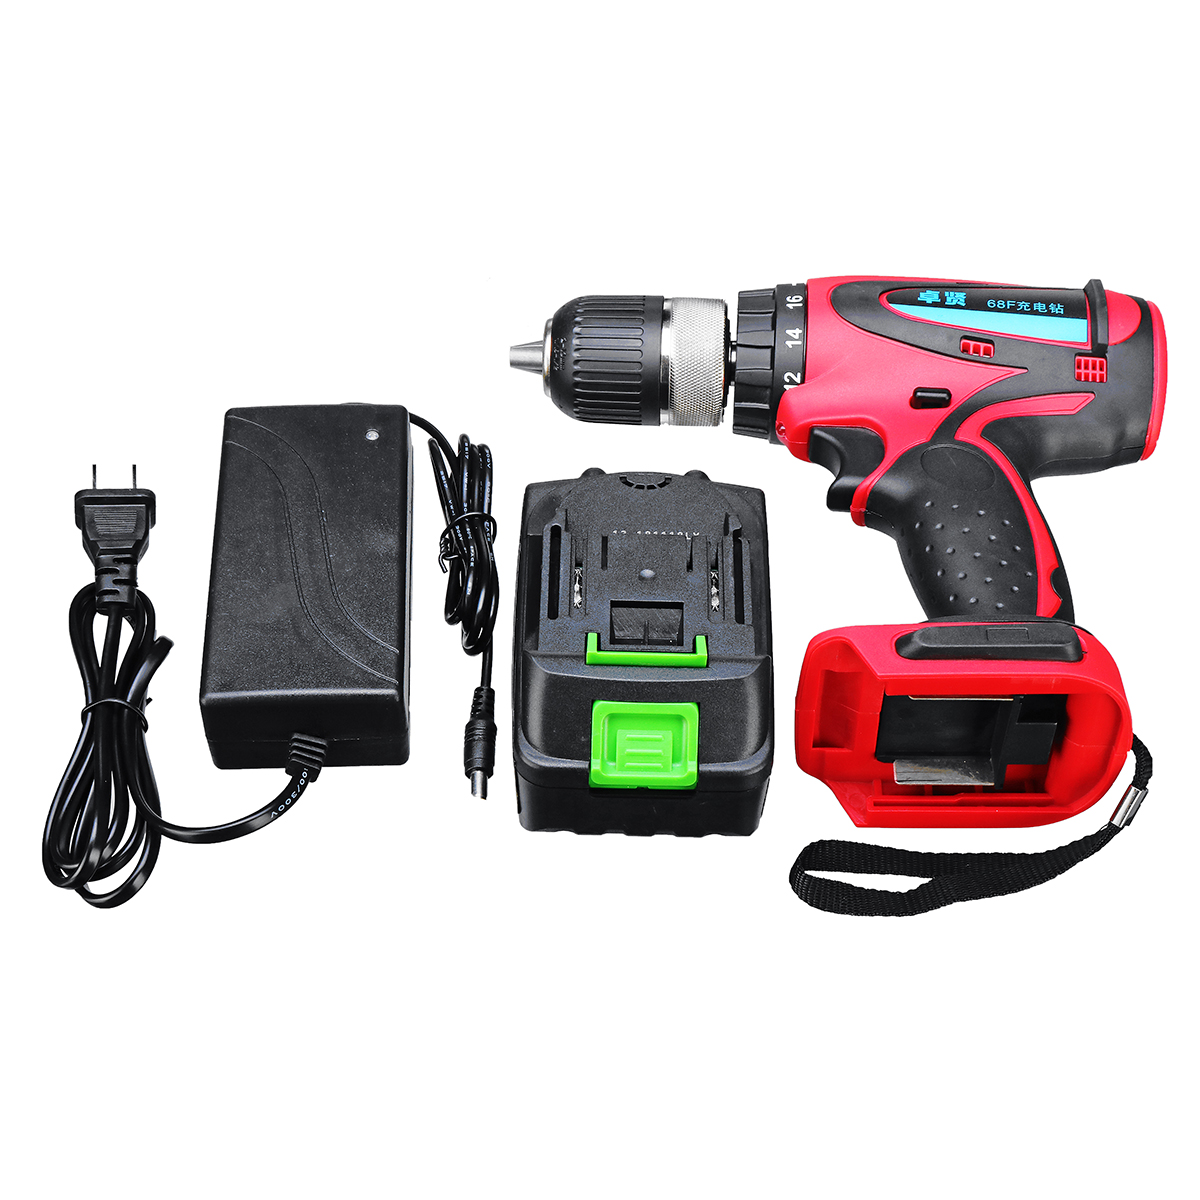 68V-10Ah-Cordless-Rechargeable-Electric-Drill-2-Speed-Heavy-Duty-Torque-Power-Drills-1403940-5